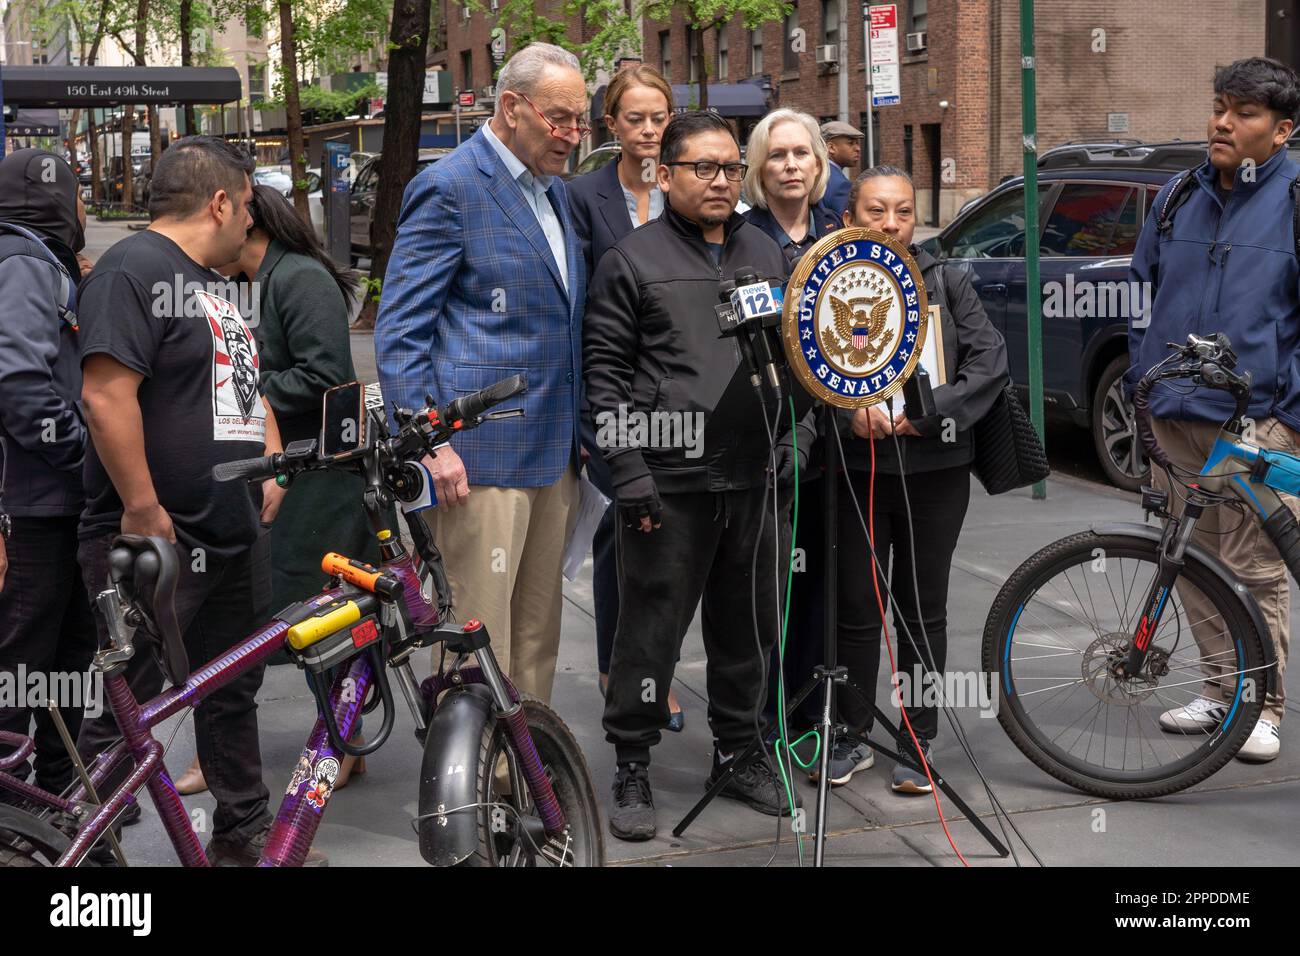 NEW YORK, NEW YORK - APRIL 23: Alfonso Villa Munoz, father of Stephanie Villa Torres who lost her life in a battery fire, speaks at a press conference on regulating standards for Lithium-Ion Batteries used in e-bikes and e-scooters on April 23, 2023 n New York City. Senate Majority Leader Chuck Schumer joined by U.S. Senator Kirsten Gillibrand and Fire Department of New York (FDNY) Commissioner Laura Kavanagh push for legislation that would regulate Lithium-ion batteries amidst a rash of recent related fires. Credit: Ron Adar/Alamy Live News Stock Photo